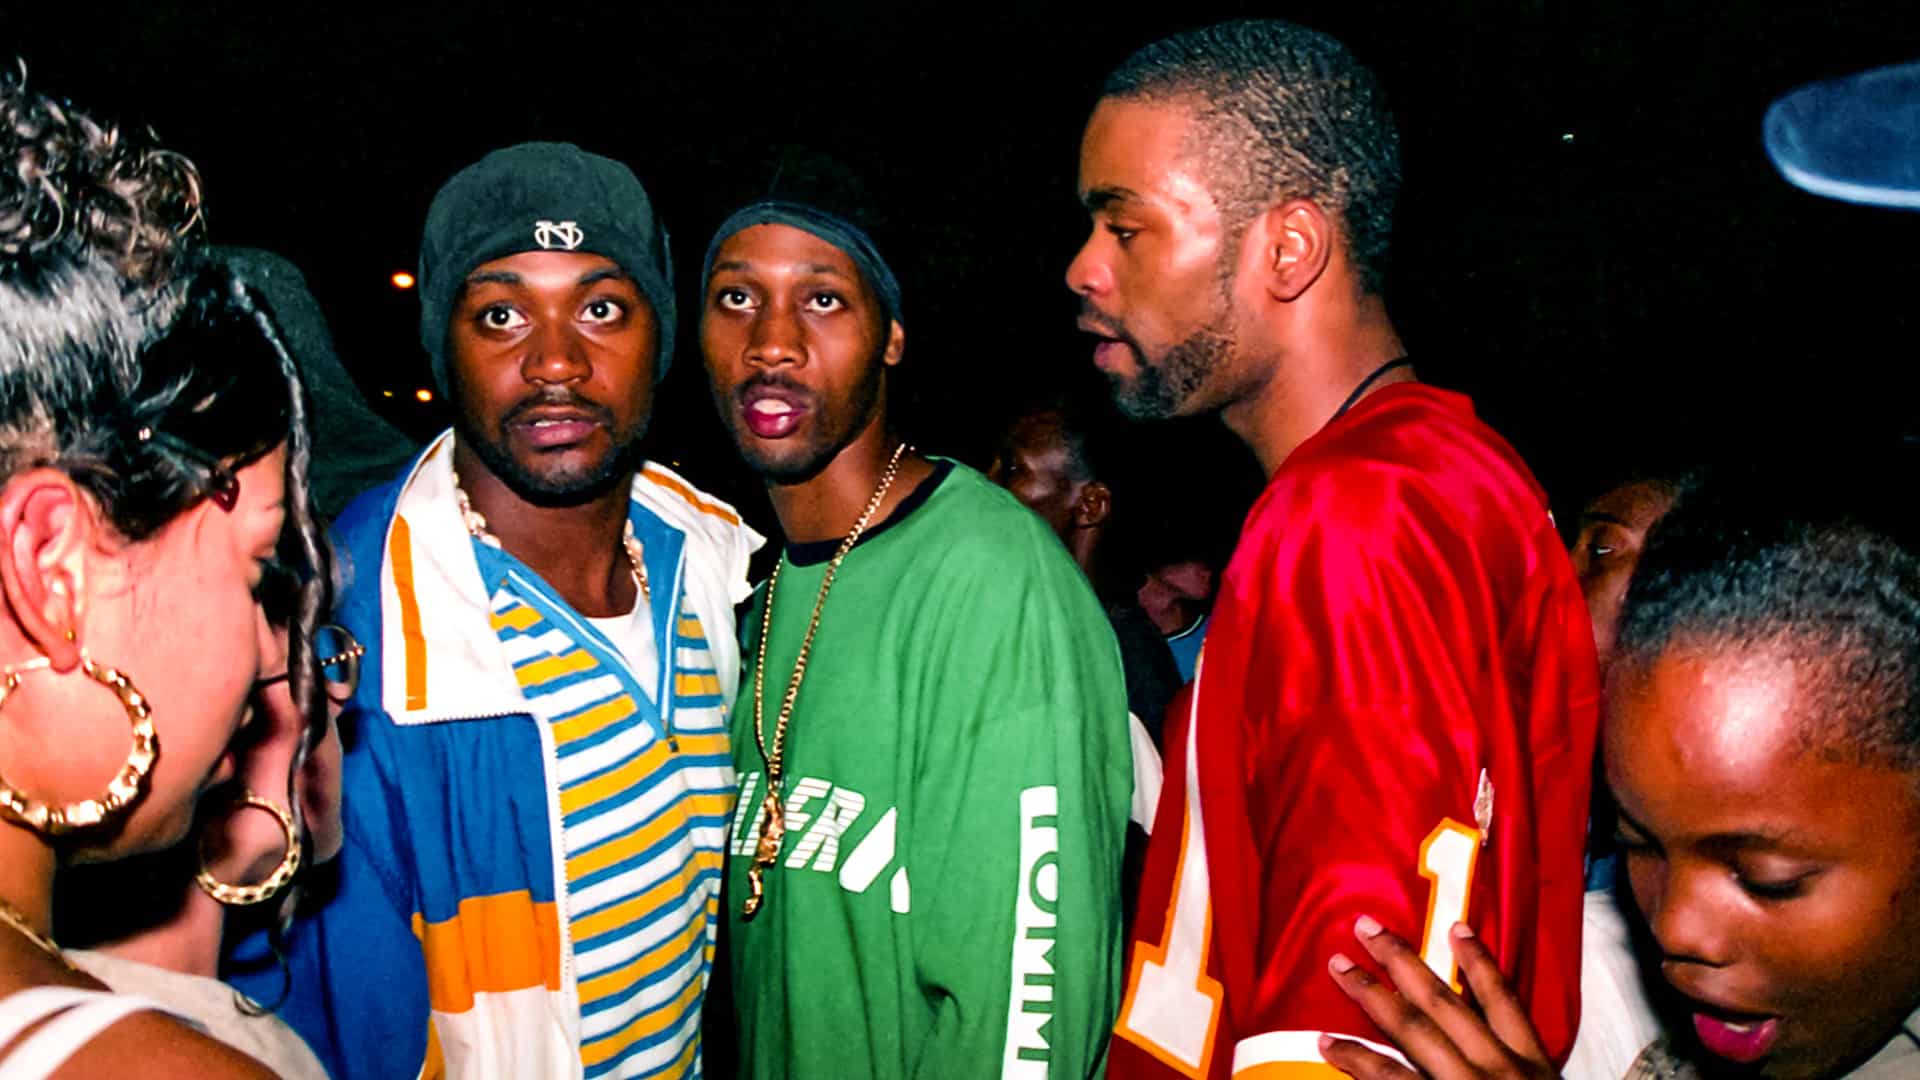 Revisiting the Golden Age of Hip Hop